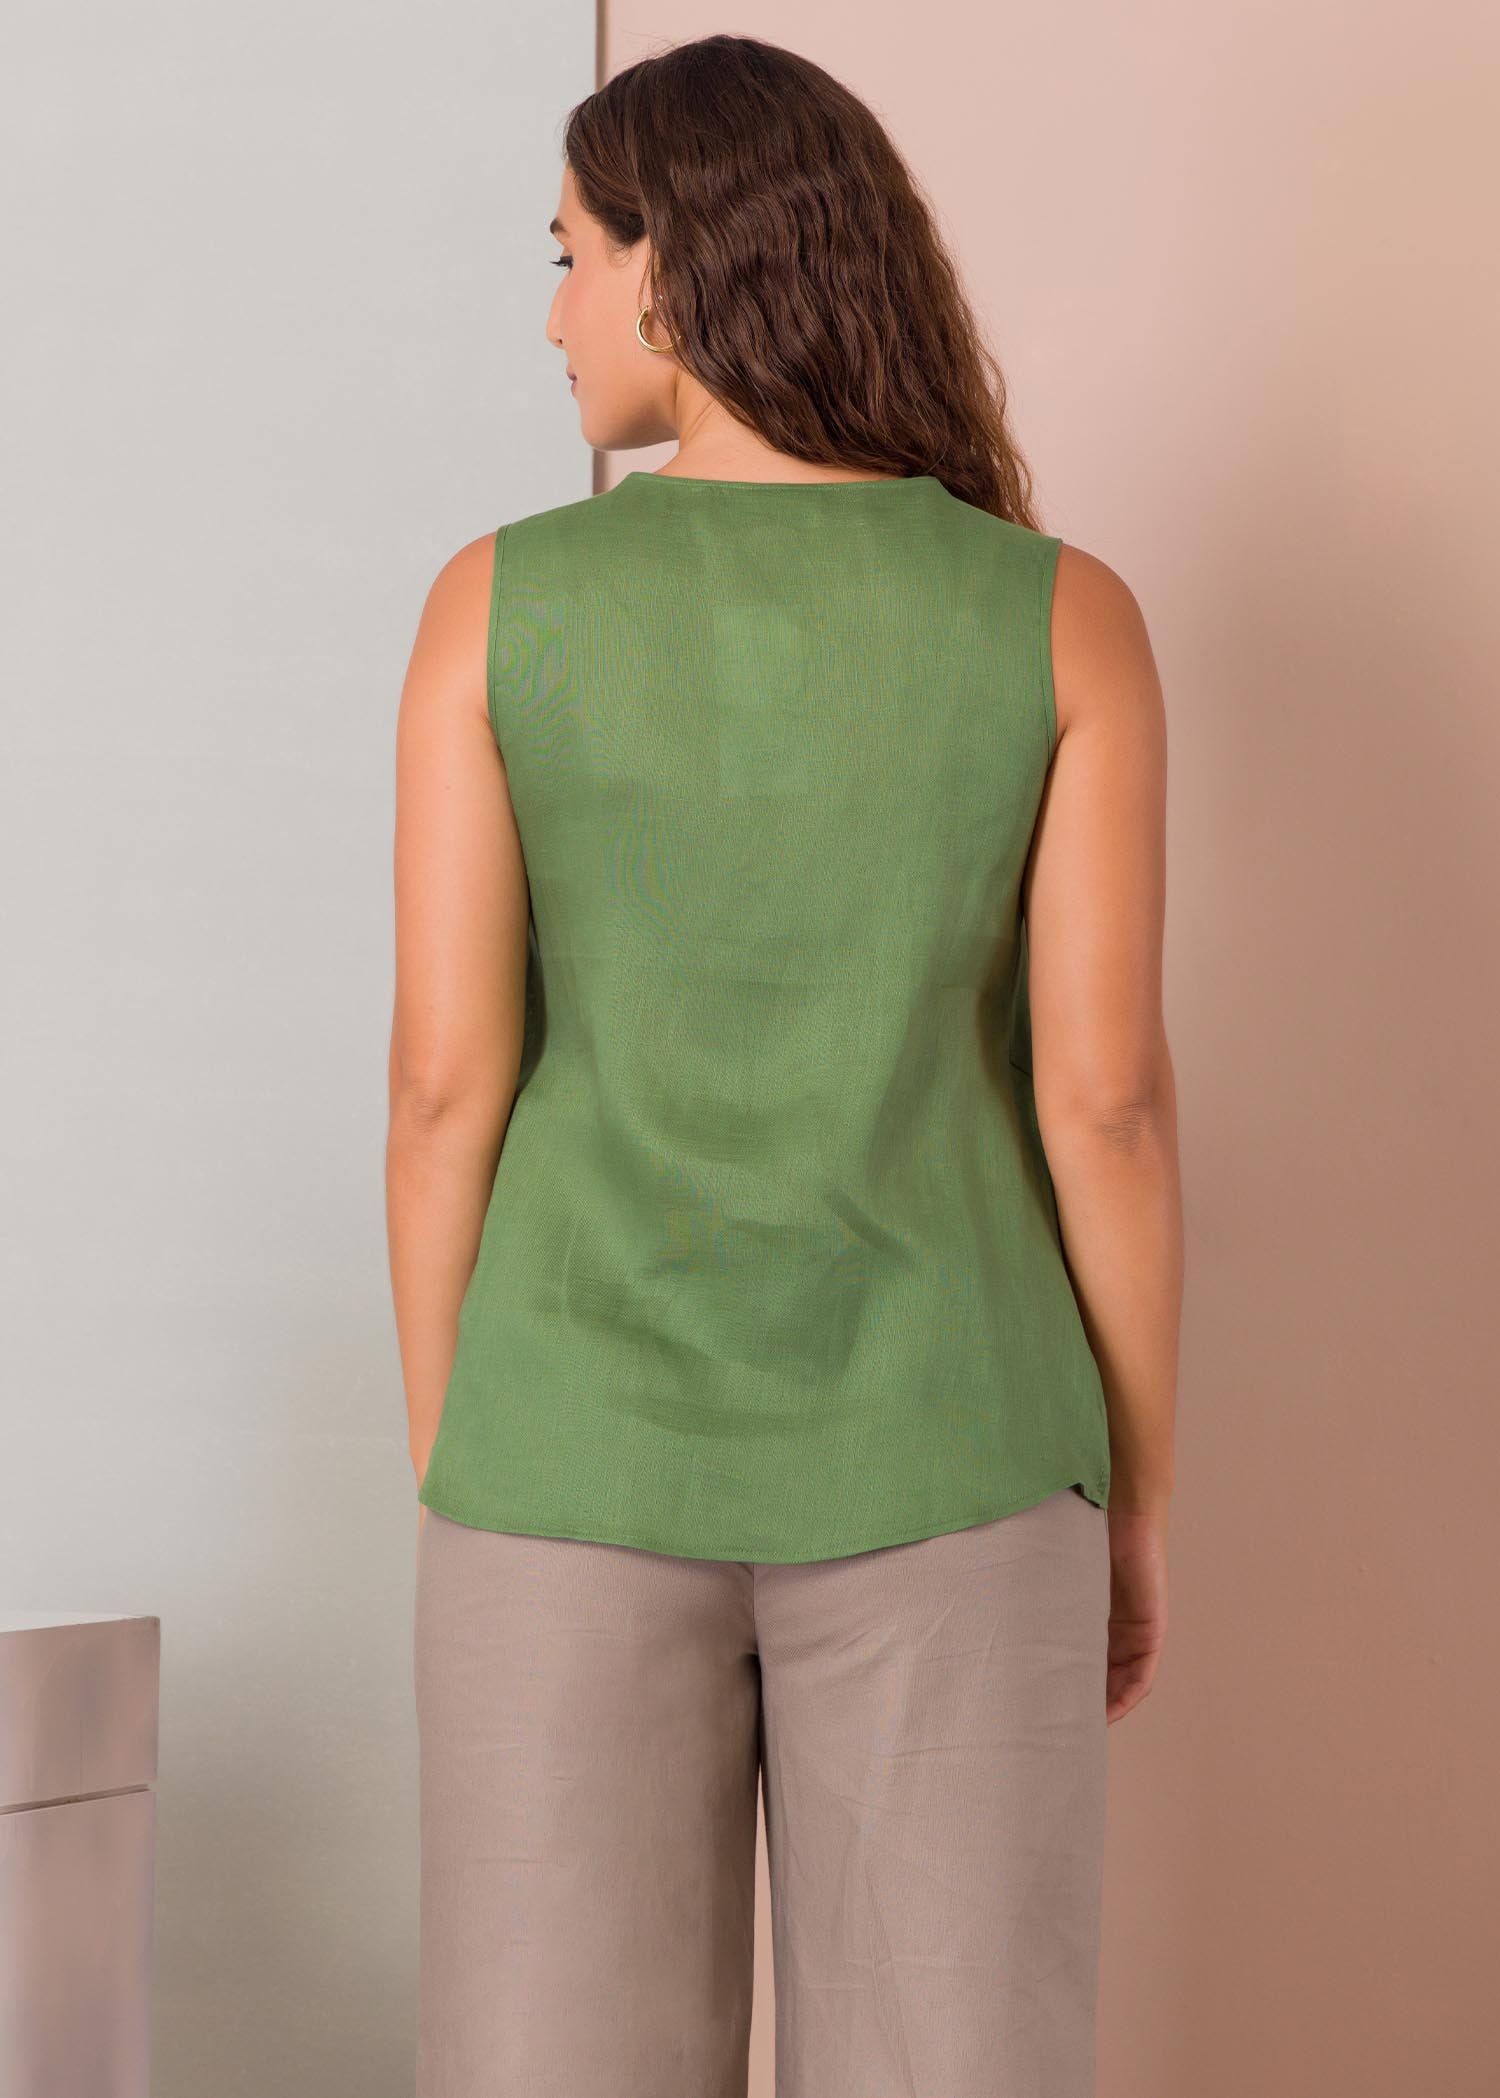 Sleeveless blouse with mock cross over panel